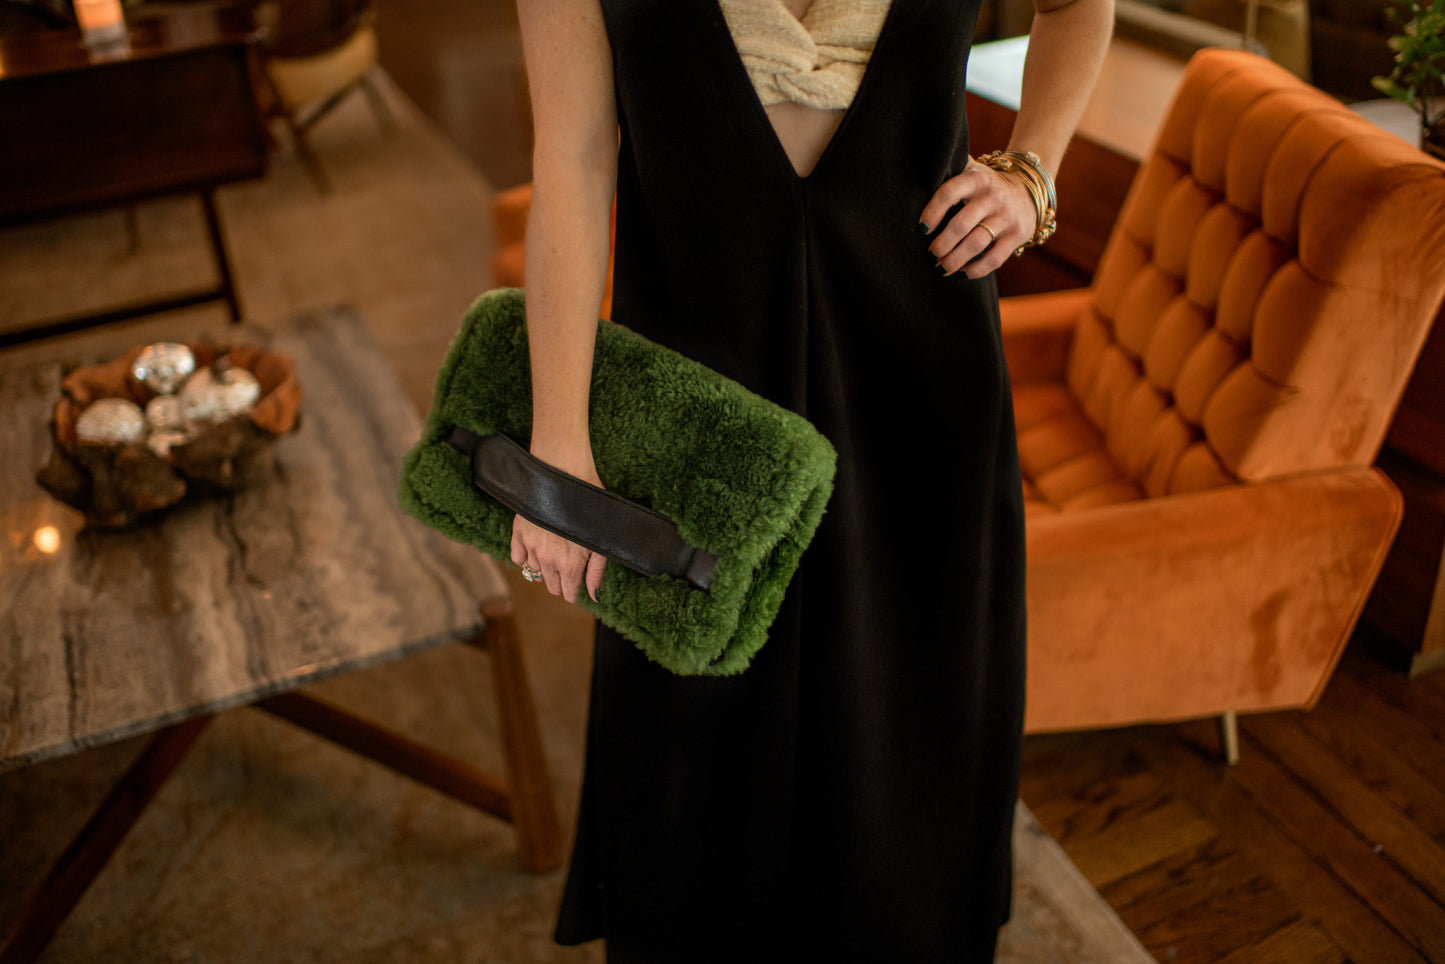 Norton and Hodges Caprivi Clutch at The Bennett Hotel Charleston